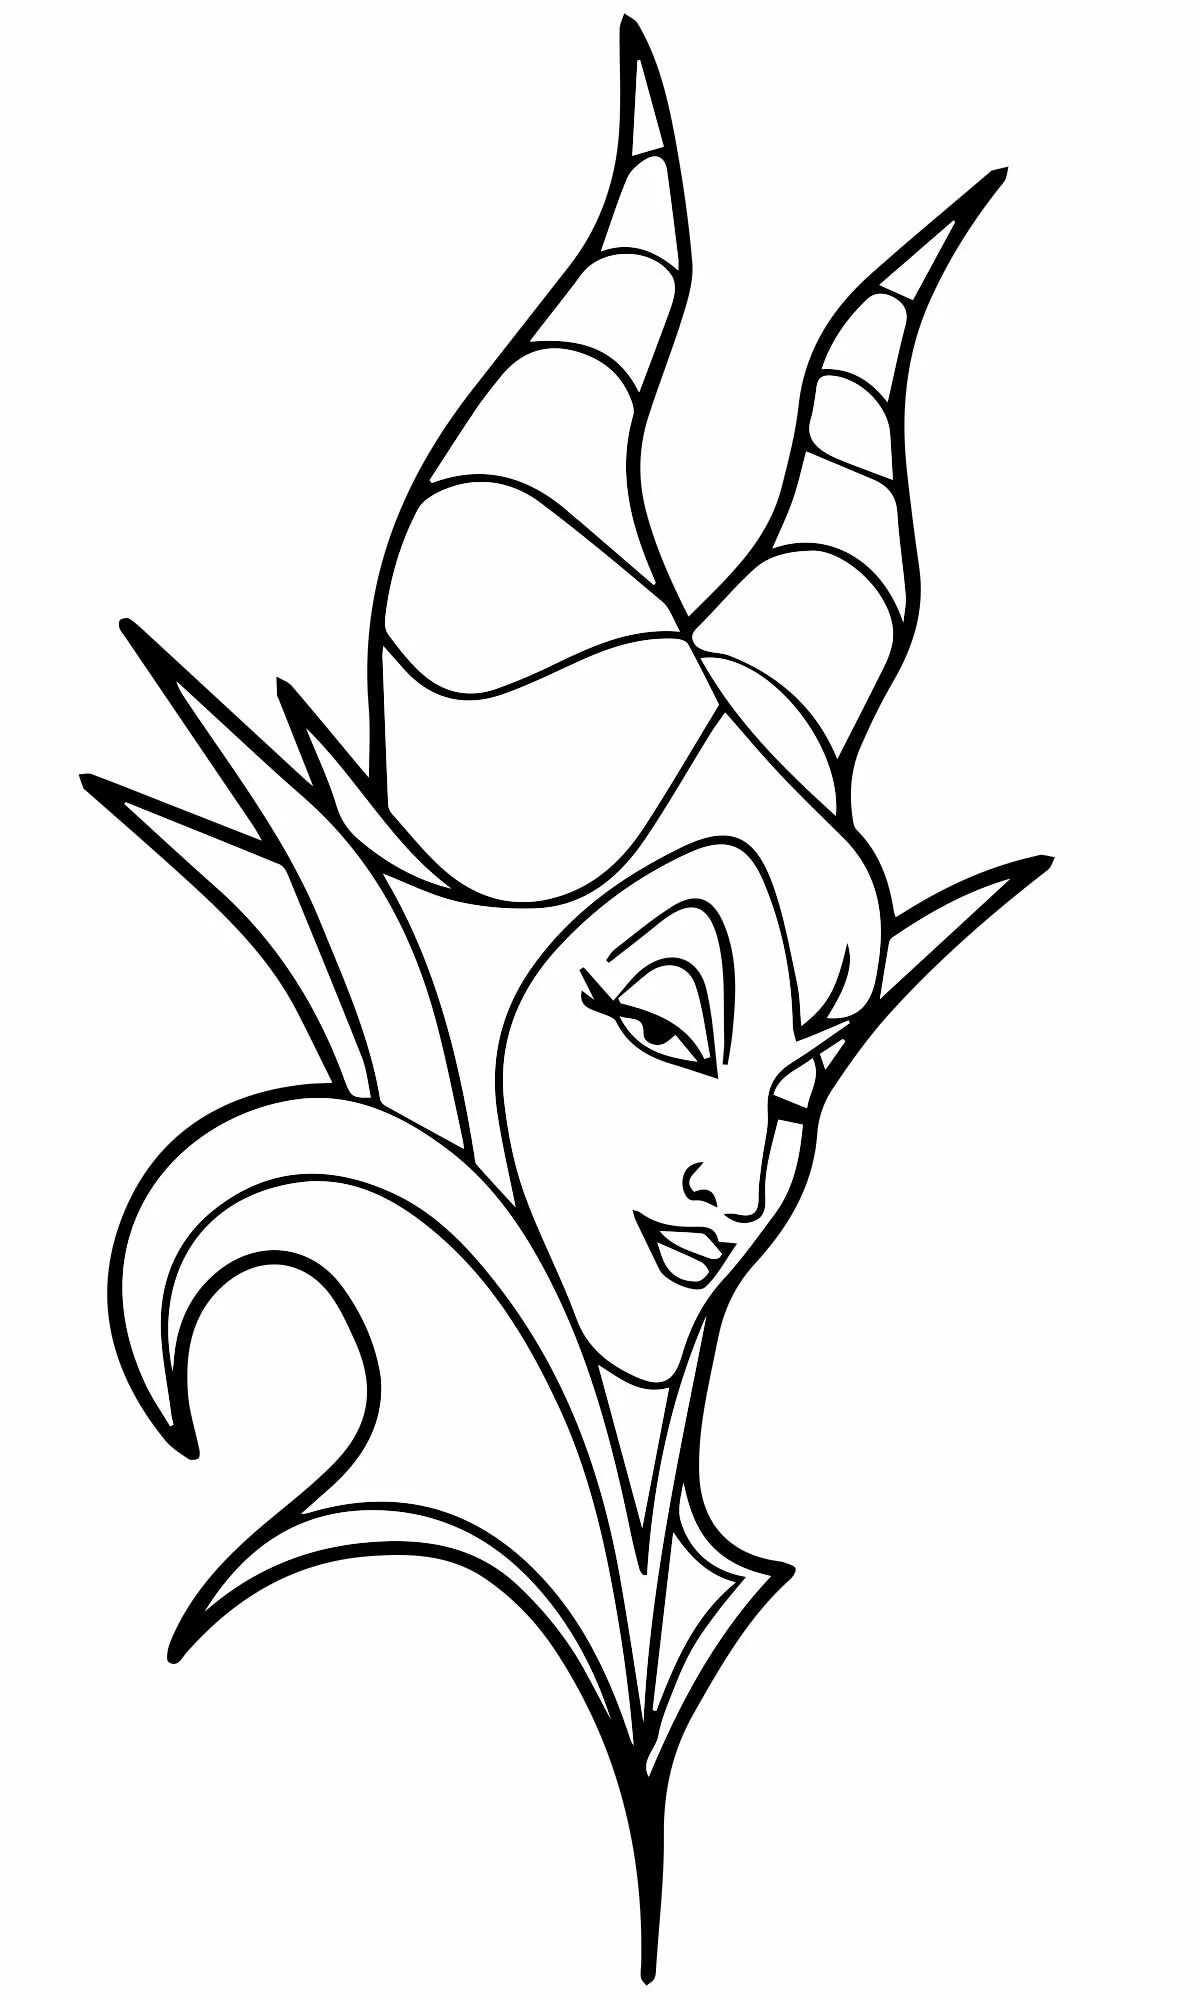 Intriguing maleficent coloring for kids